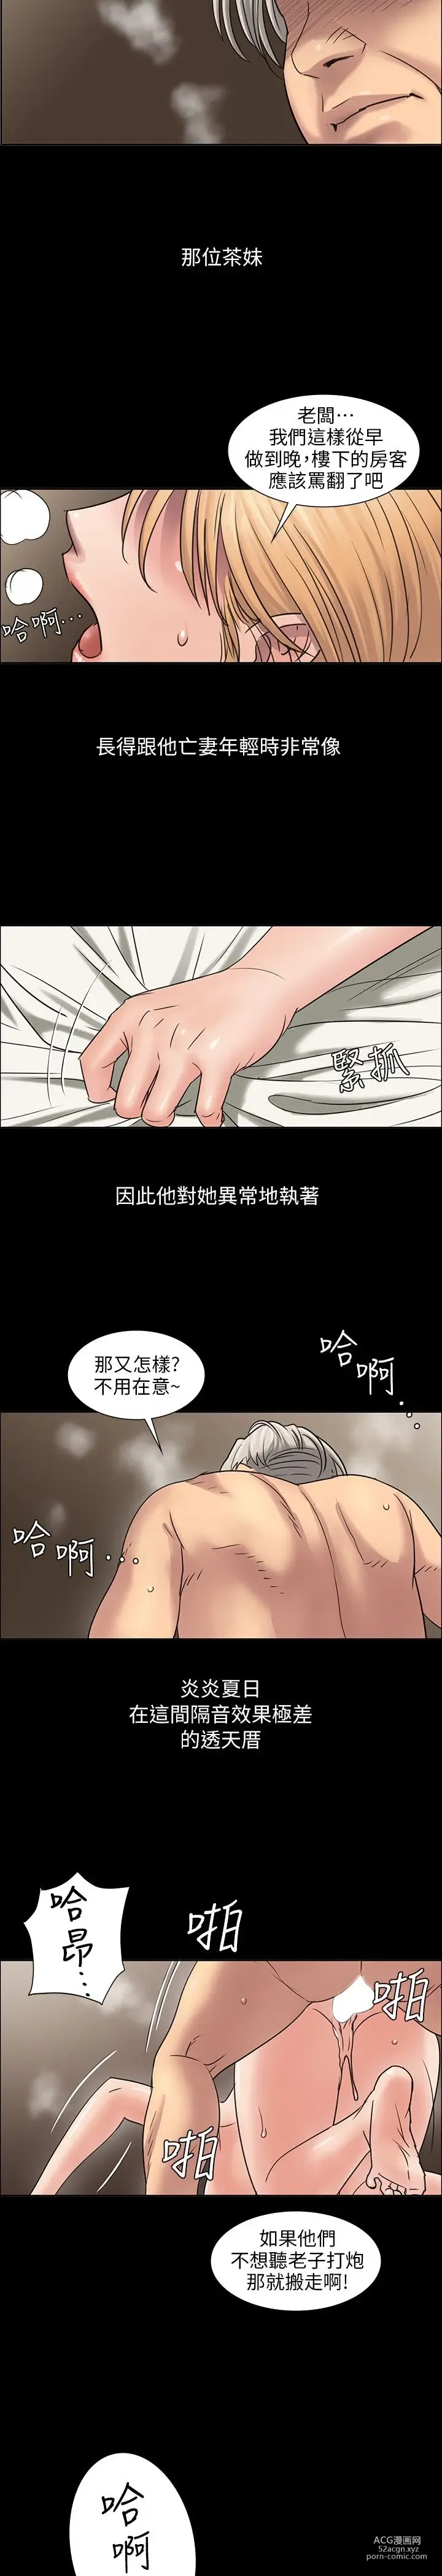 Page 6 of manga 傀儡 Queen Bee 1-50